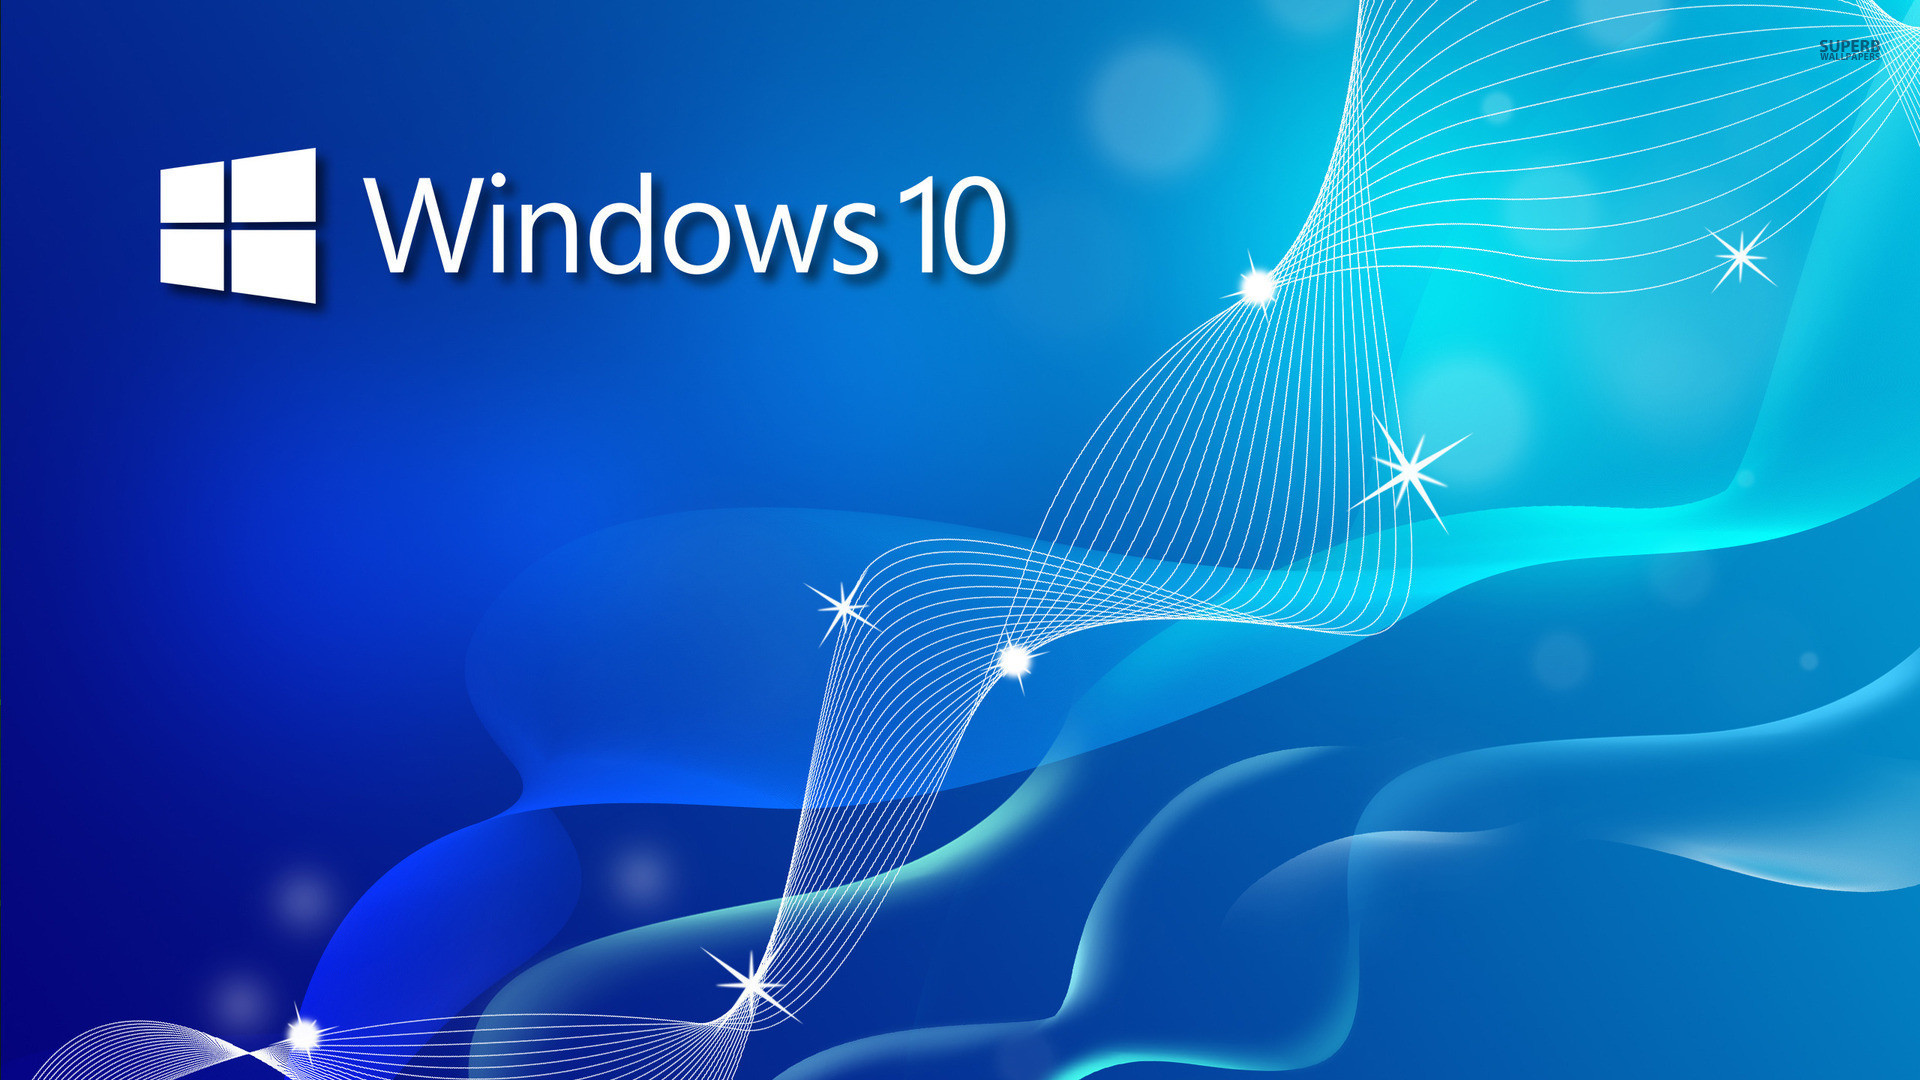 1920x1080  Windows 10 Wallpaper Free Download | Full HD Pictures